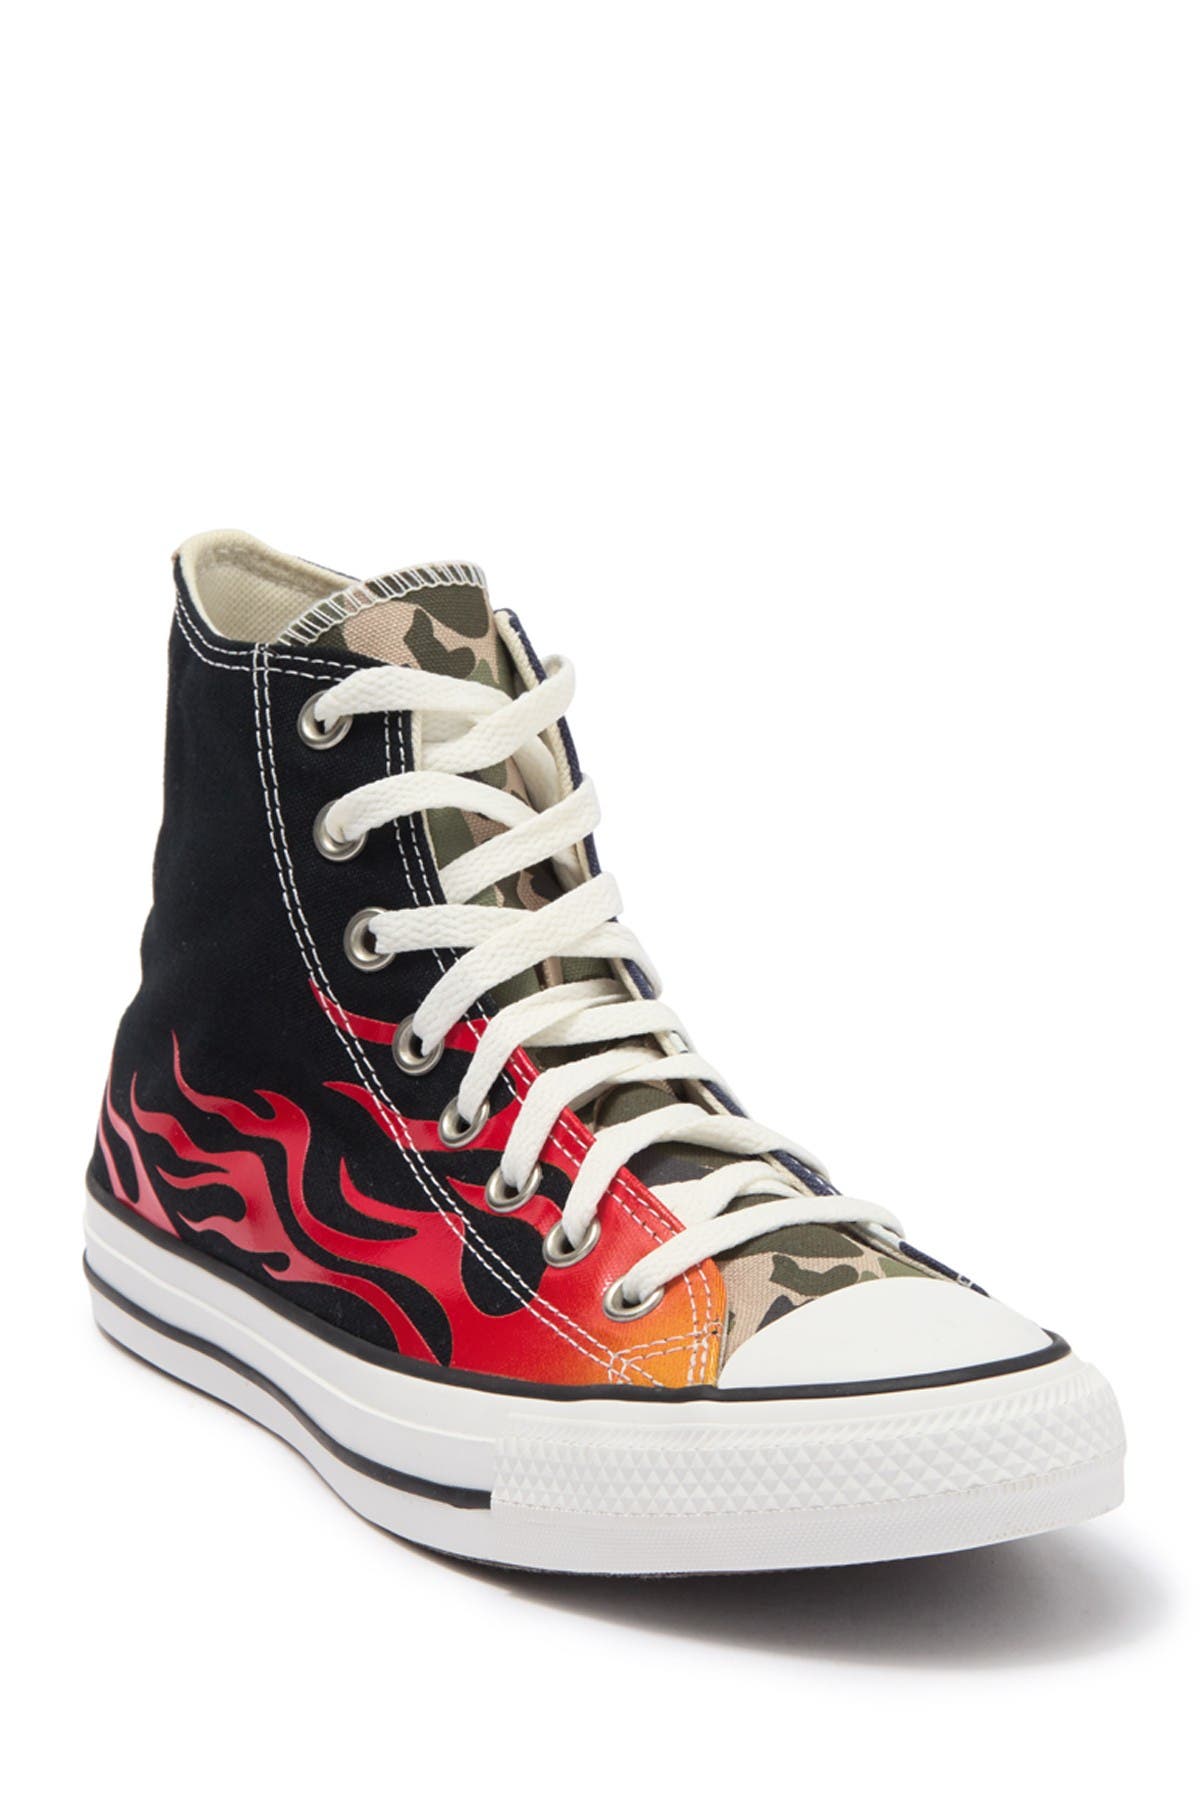 Converse Chuck Taylor All Star Flame High Top Sneaker In Black/vintage ...